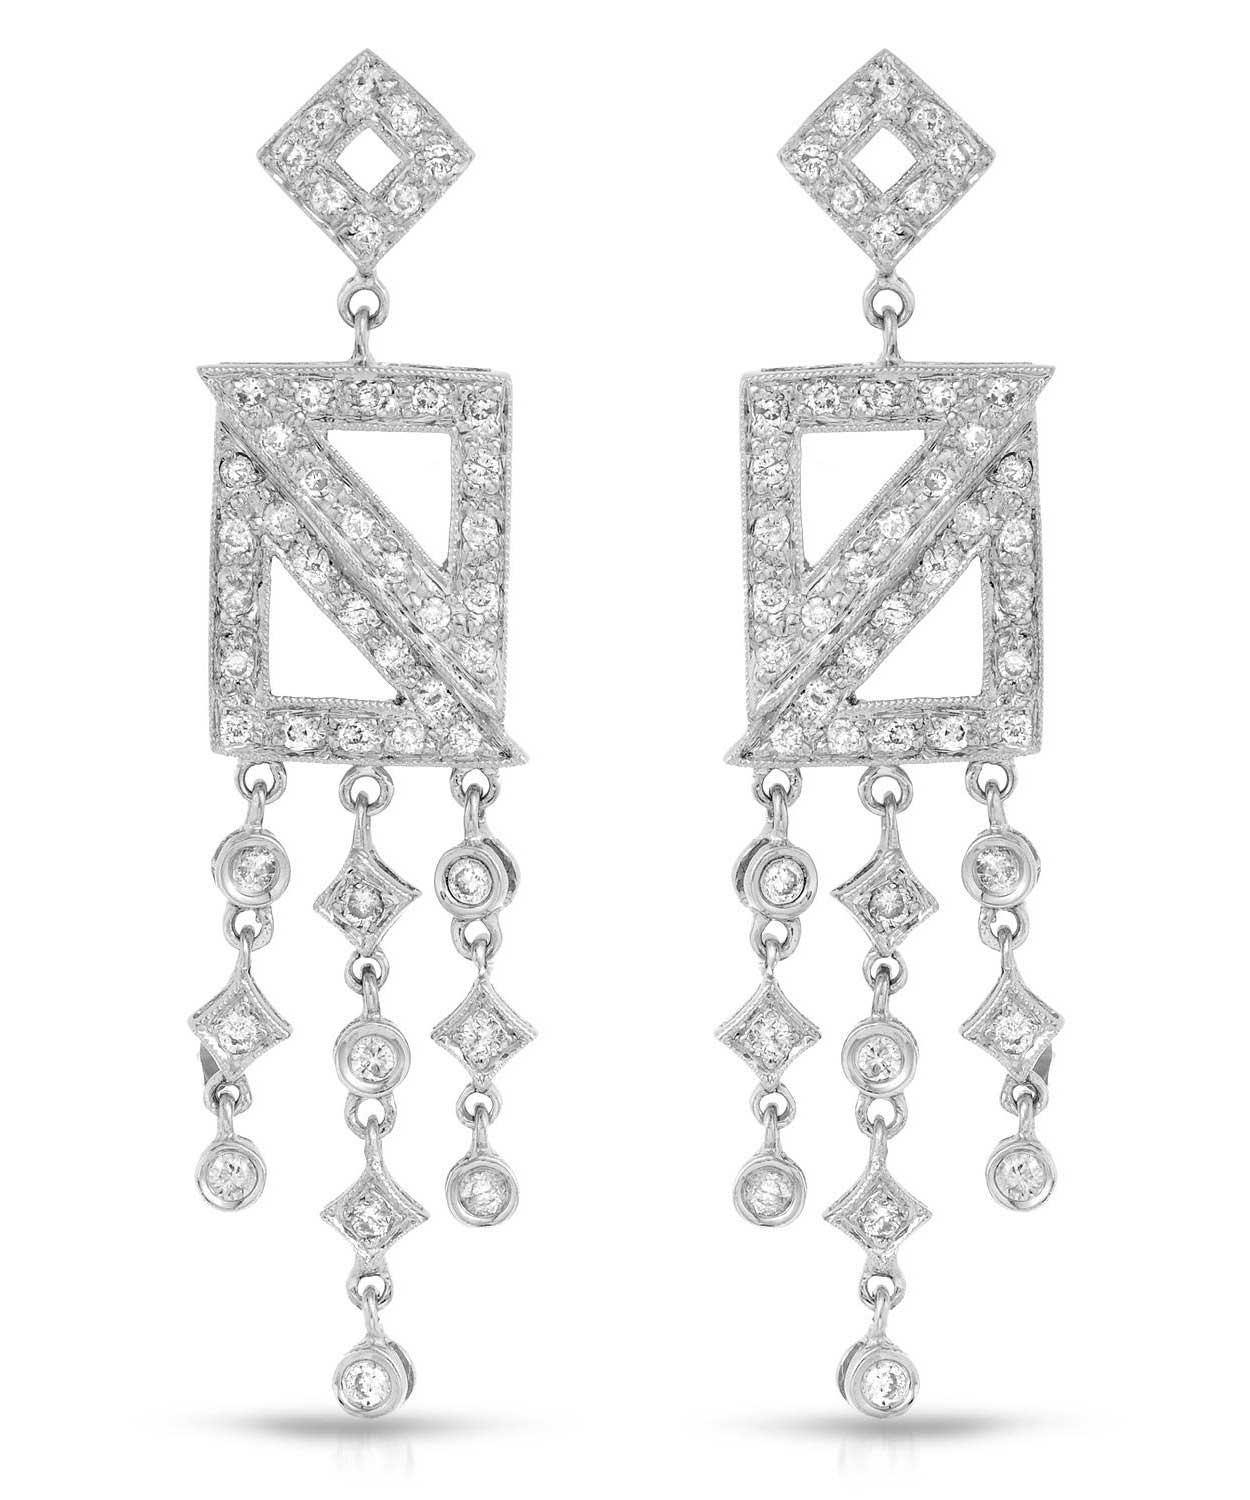 Allure Collection 0.95 ctw Diamond 18k Gold Art Deco Style Chandelier Earrings View 1